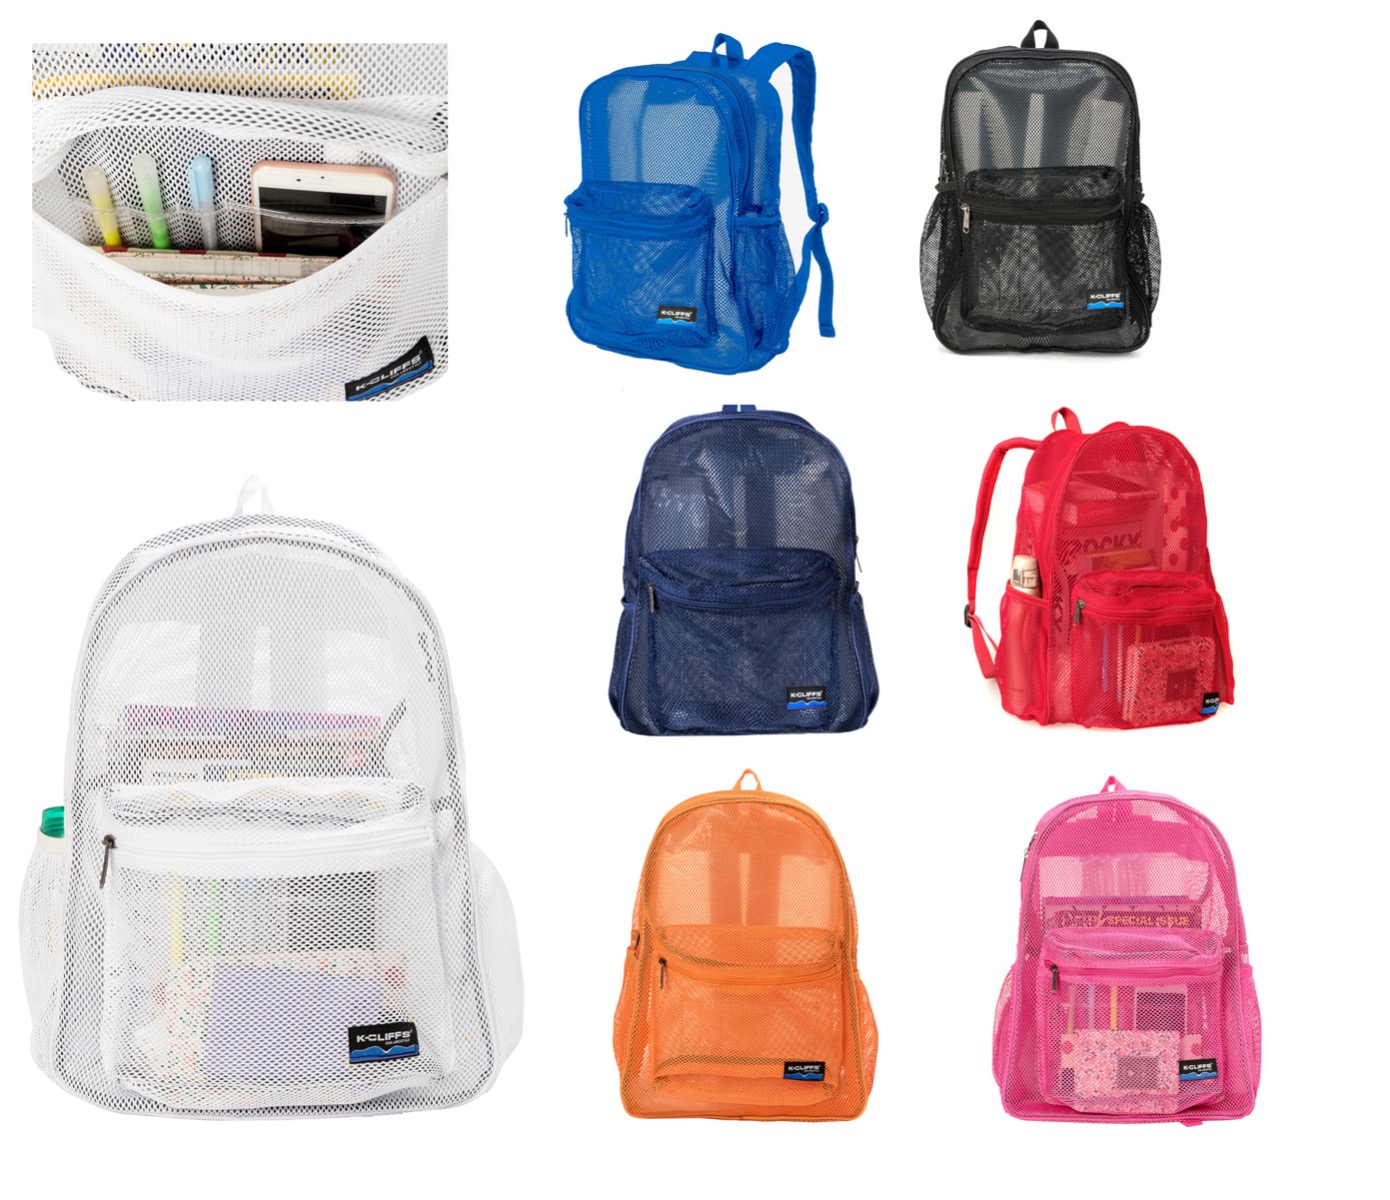 ''17'''' Heavy Duty Mesh BACKPACKs w/ Zip-Up Cargo Pockets - Choose Your Color(s)''